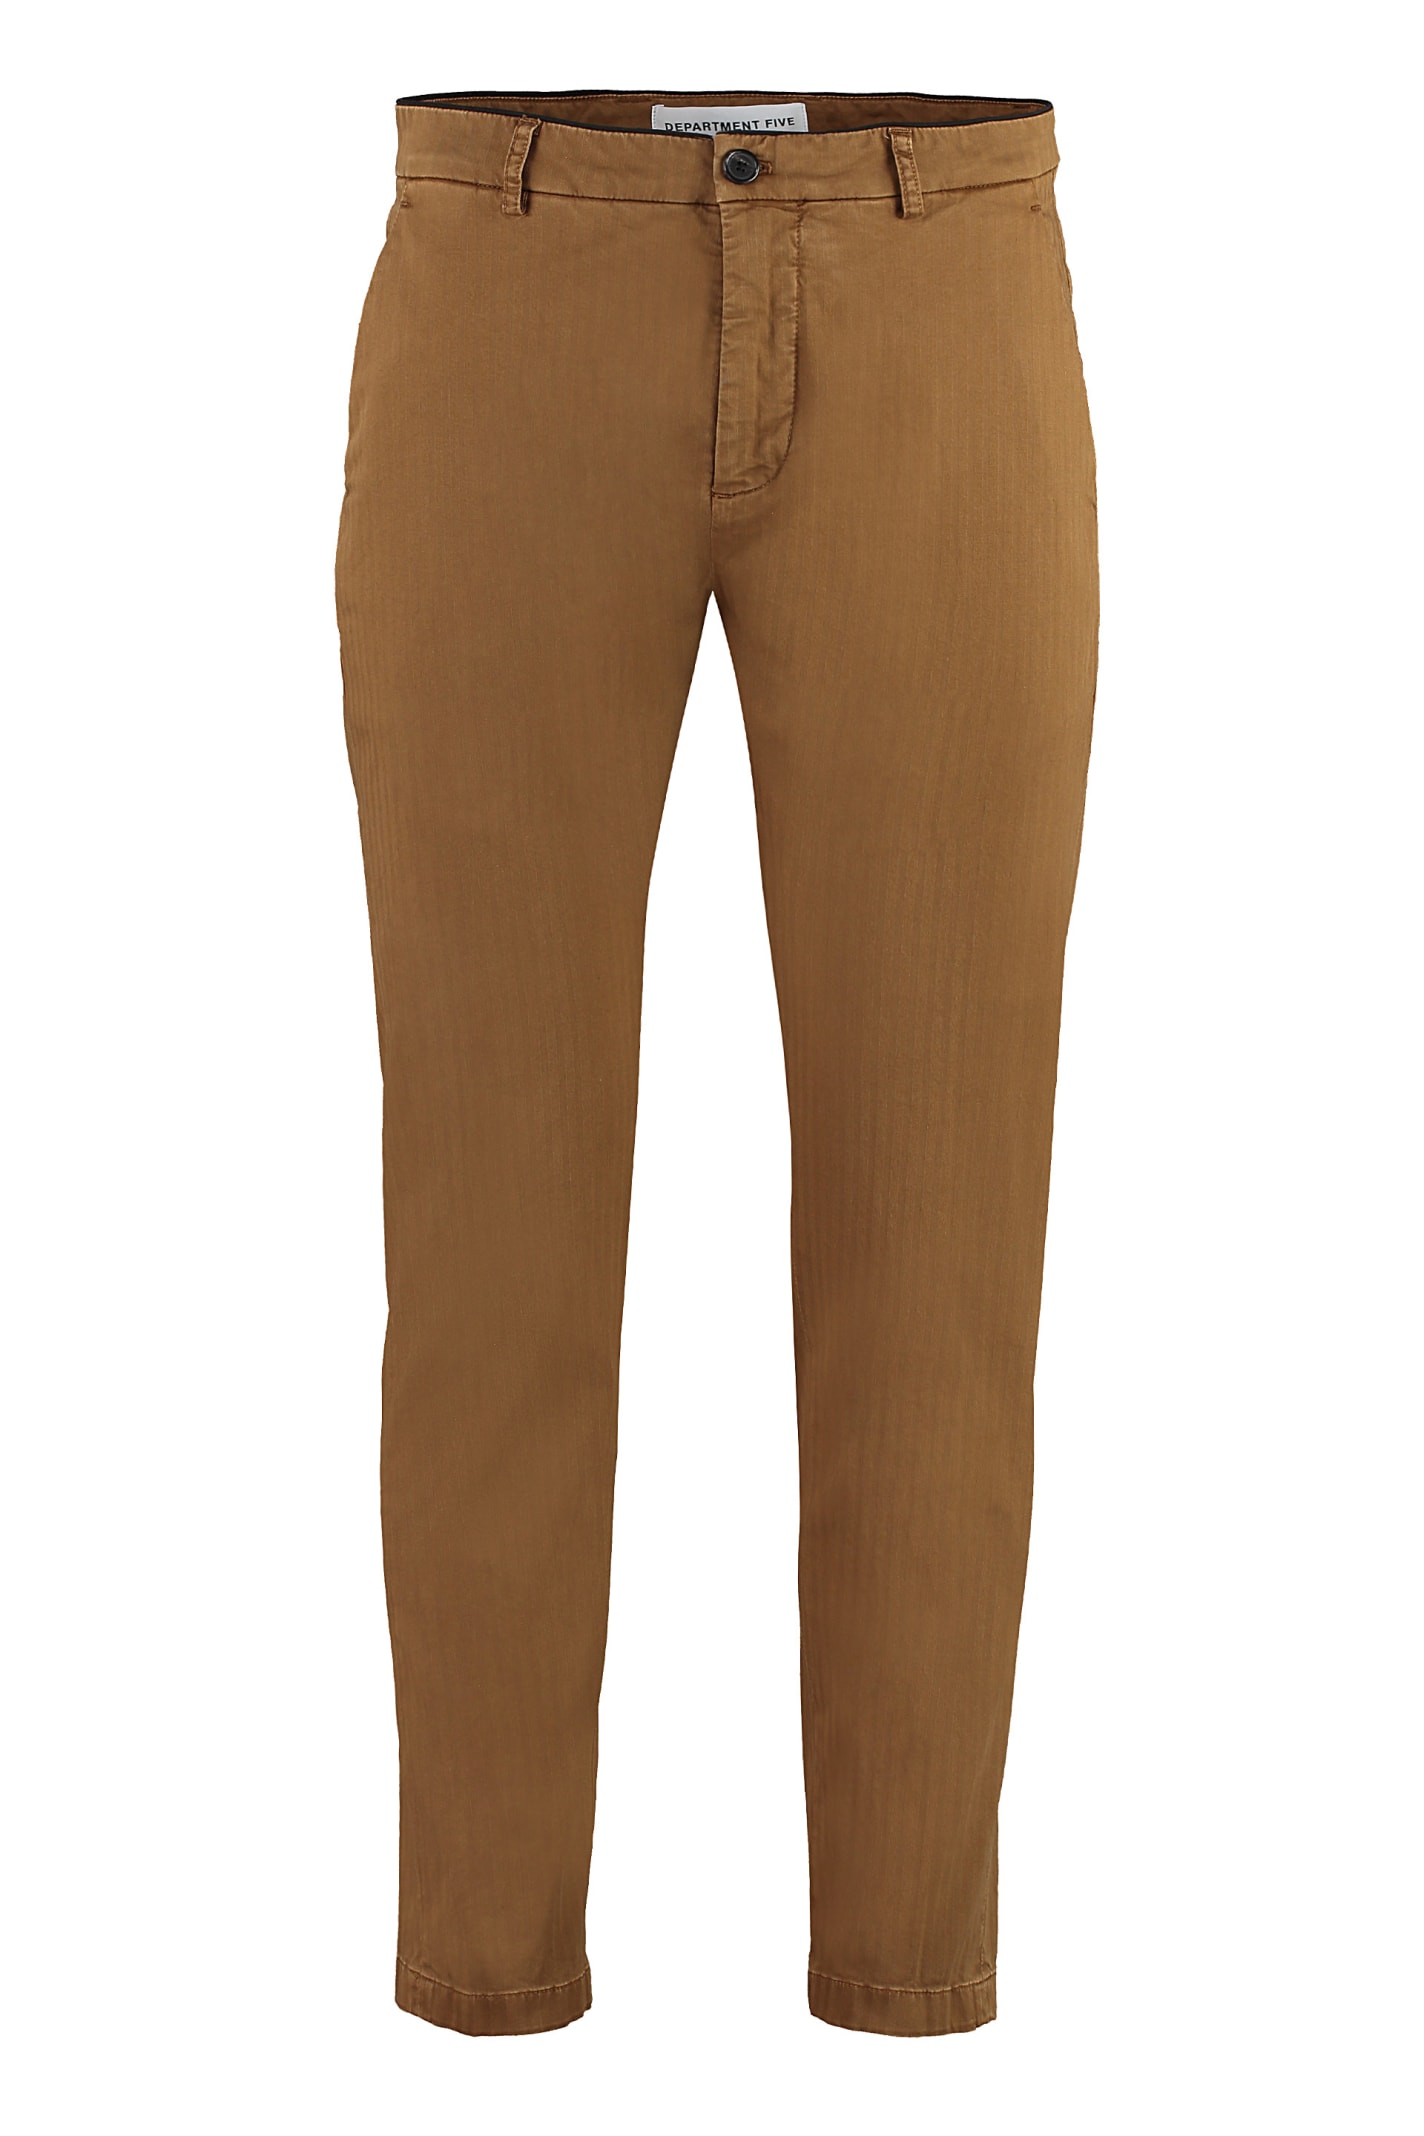 Shop Department Five Prince Chino Pants In Copper